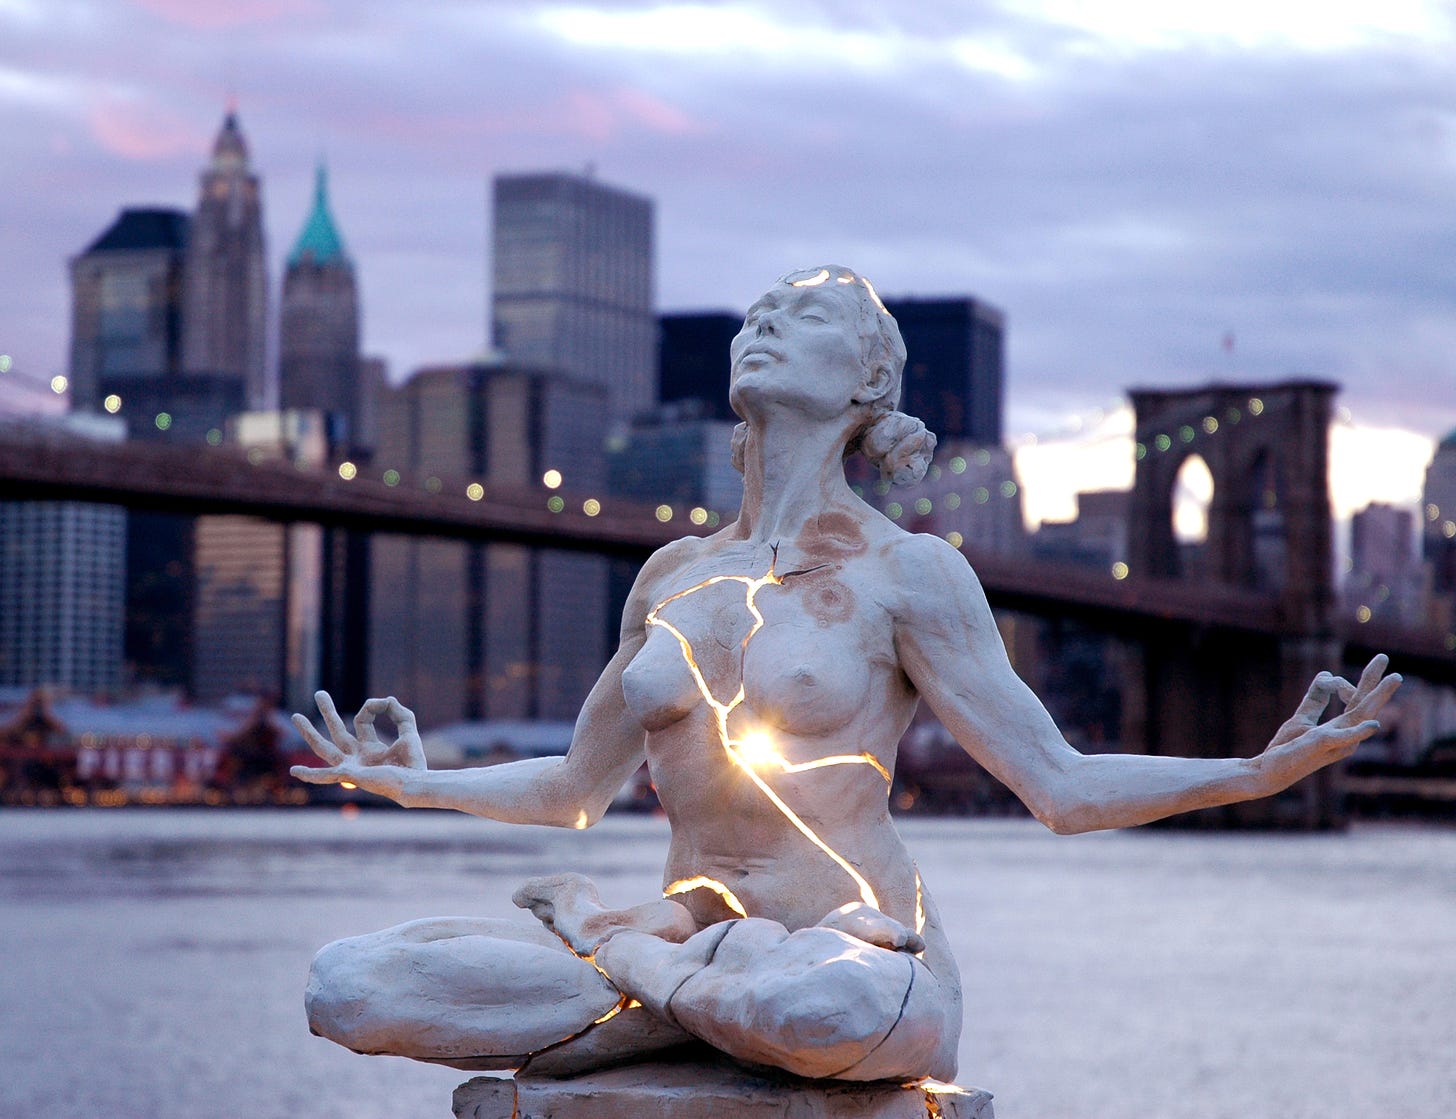 A sculpture of a woman sitting in lotus position, cracks from head to sternum to folded legs, light streaming through. In the background, the NYC skyline. Artist, Paige Bradley.